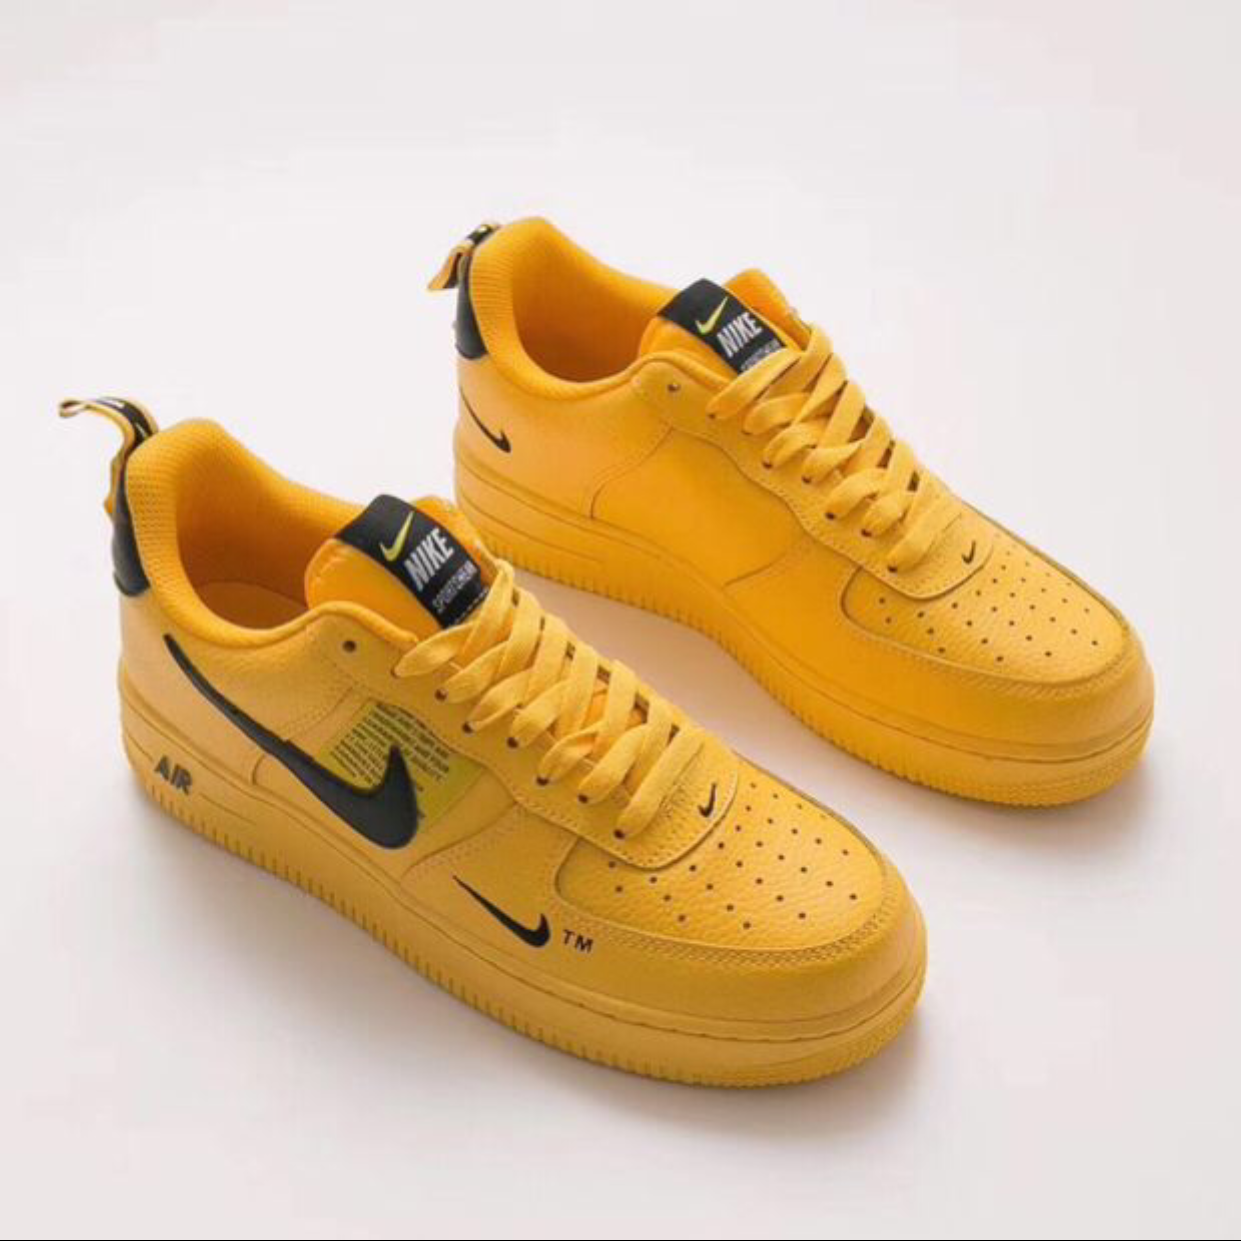 NIKE Air force 1 – Tamy's Beauty Products